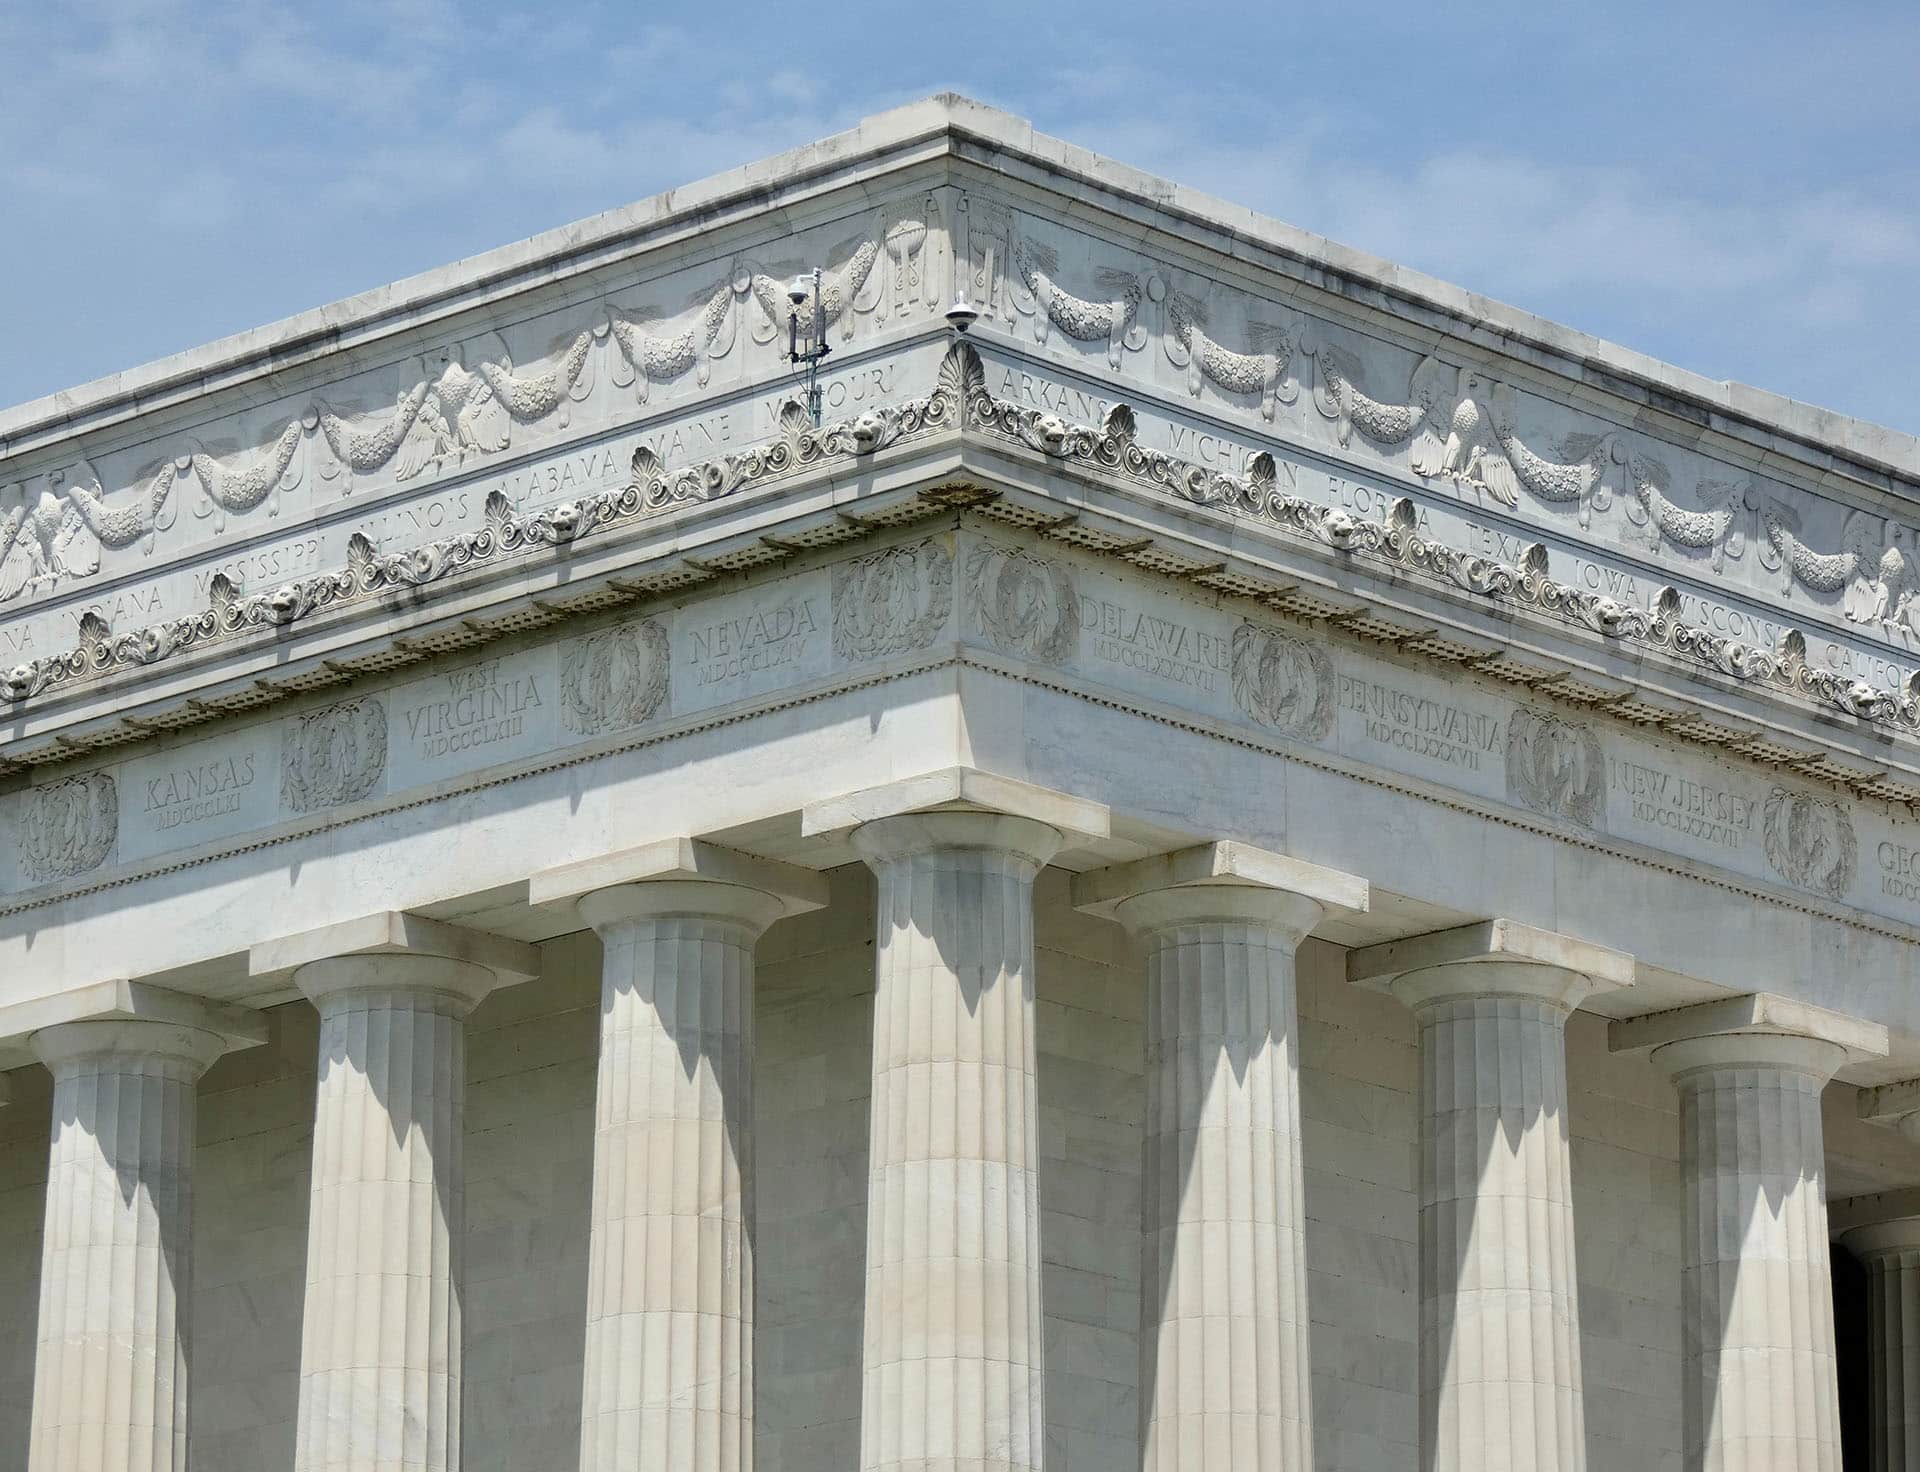 A close-up view of the top portion of the Lincoln Memorial in Washington, D.C., showcasing detailed friezes and inscriptions above the iconic Doric columns. Amidst a successful execution of crisis management, the clear sky offers a bright backdrop to the classic white marble structure.